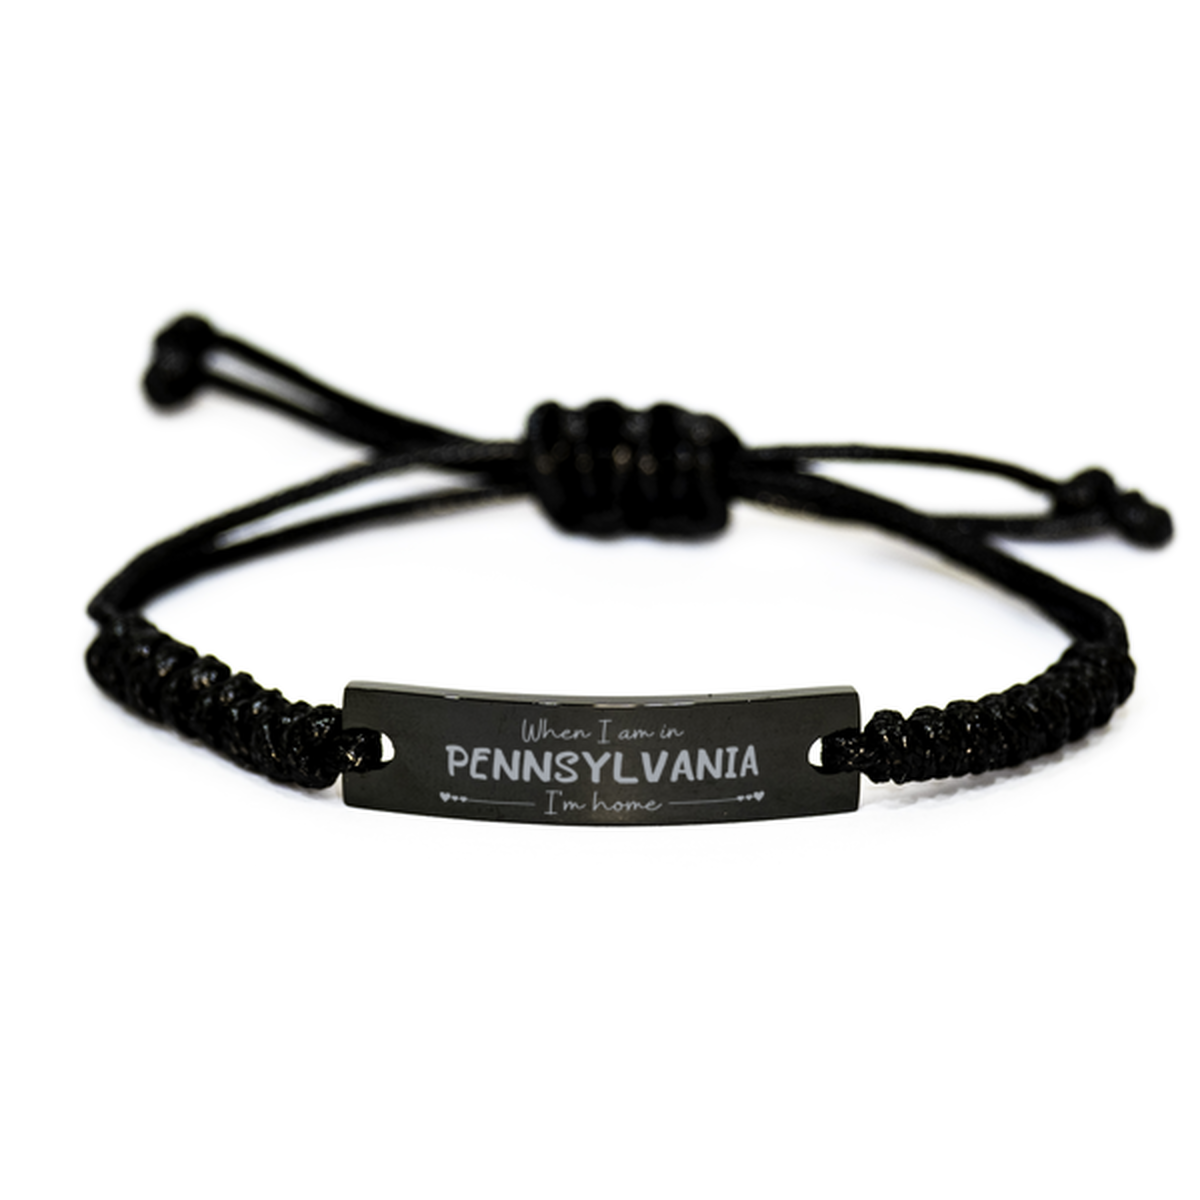 When I am in Pennsylvania I'm home Black Rope Bracelet, Cheap Gifts For Pennsylvania, State Pennsylvania Birthday Gifts for Friends Coworker